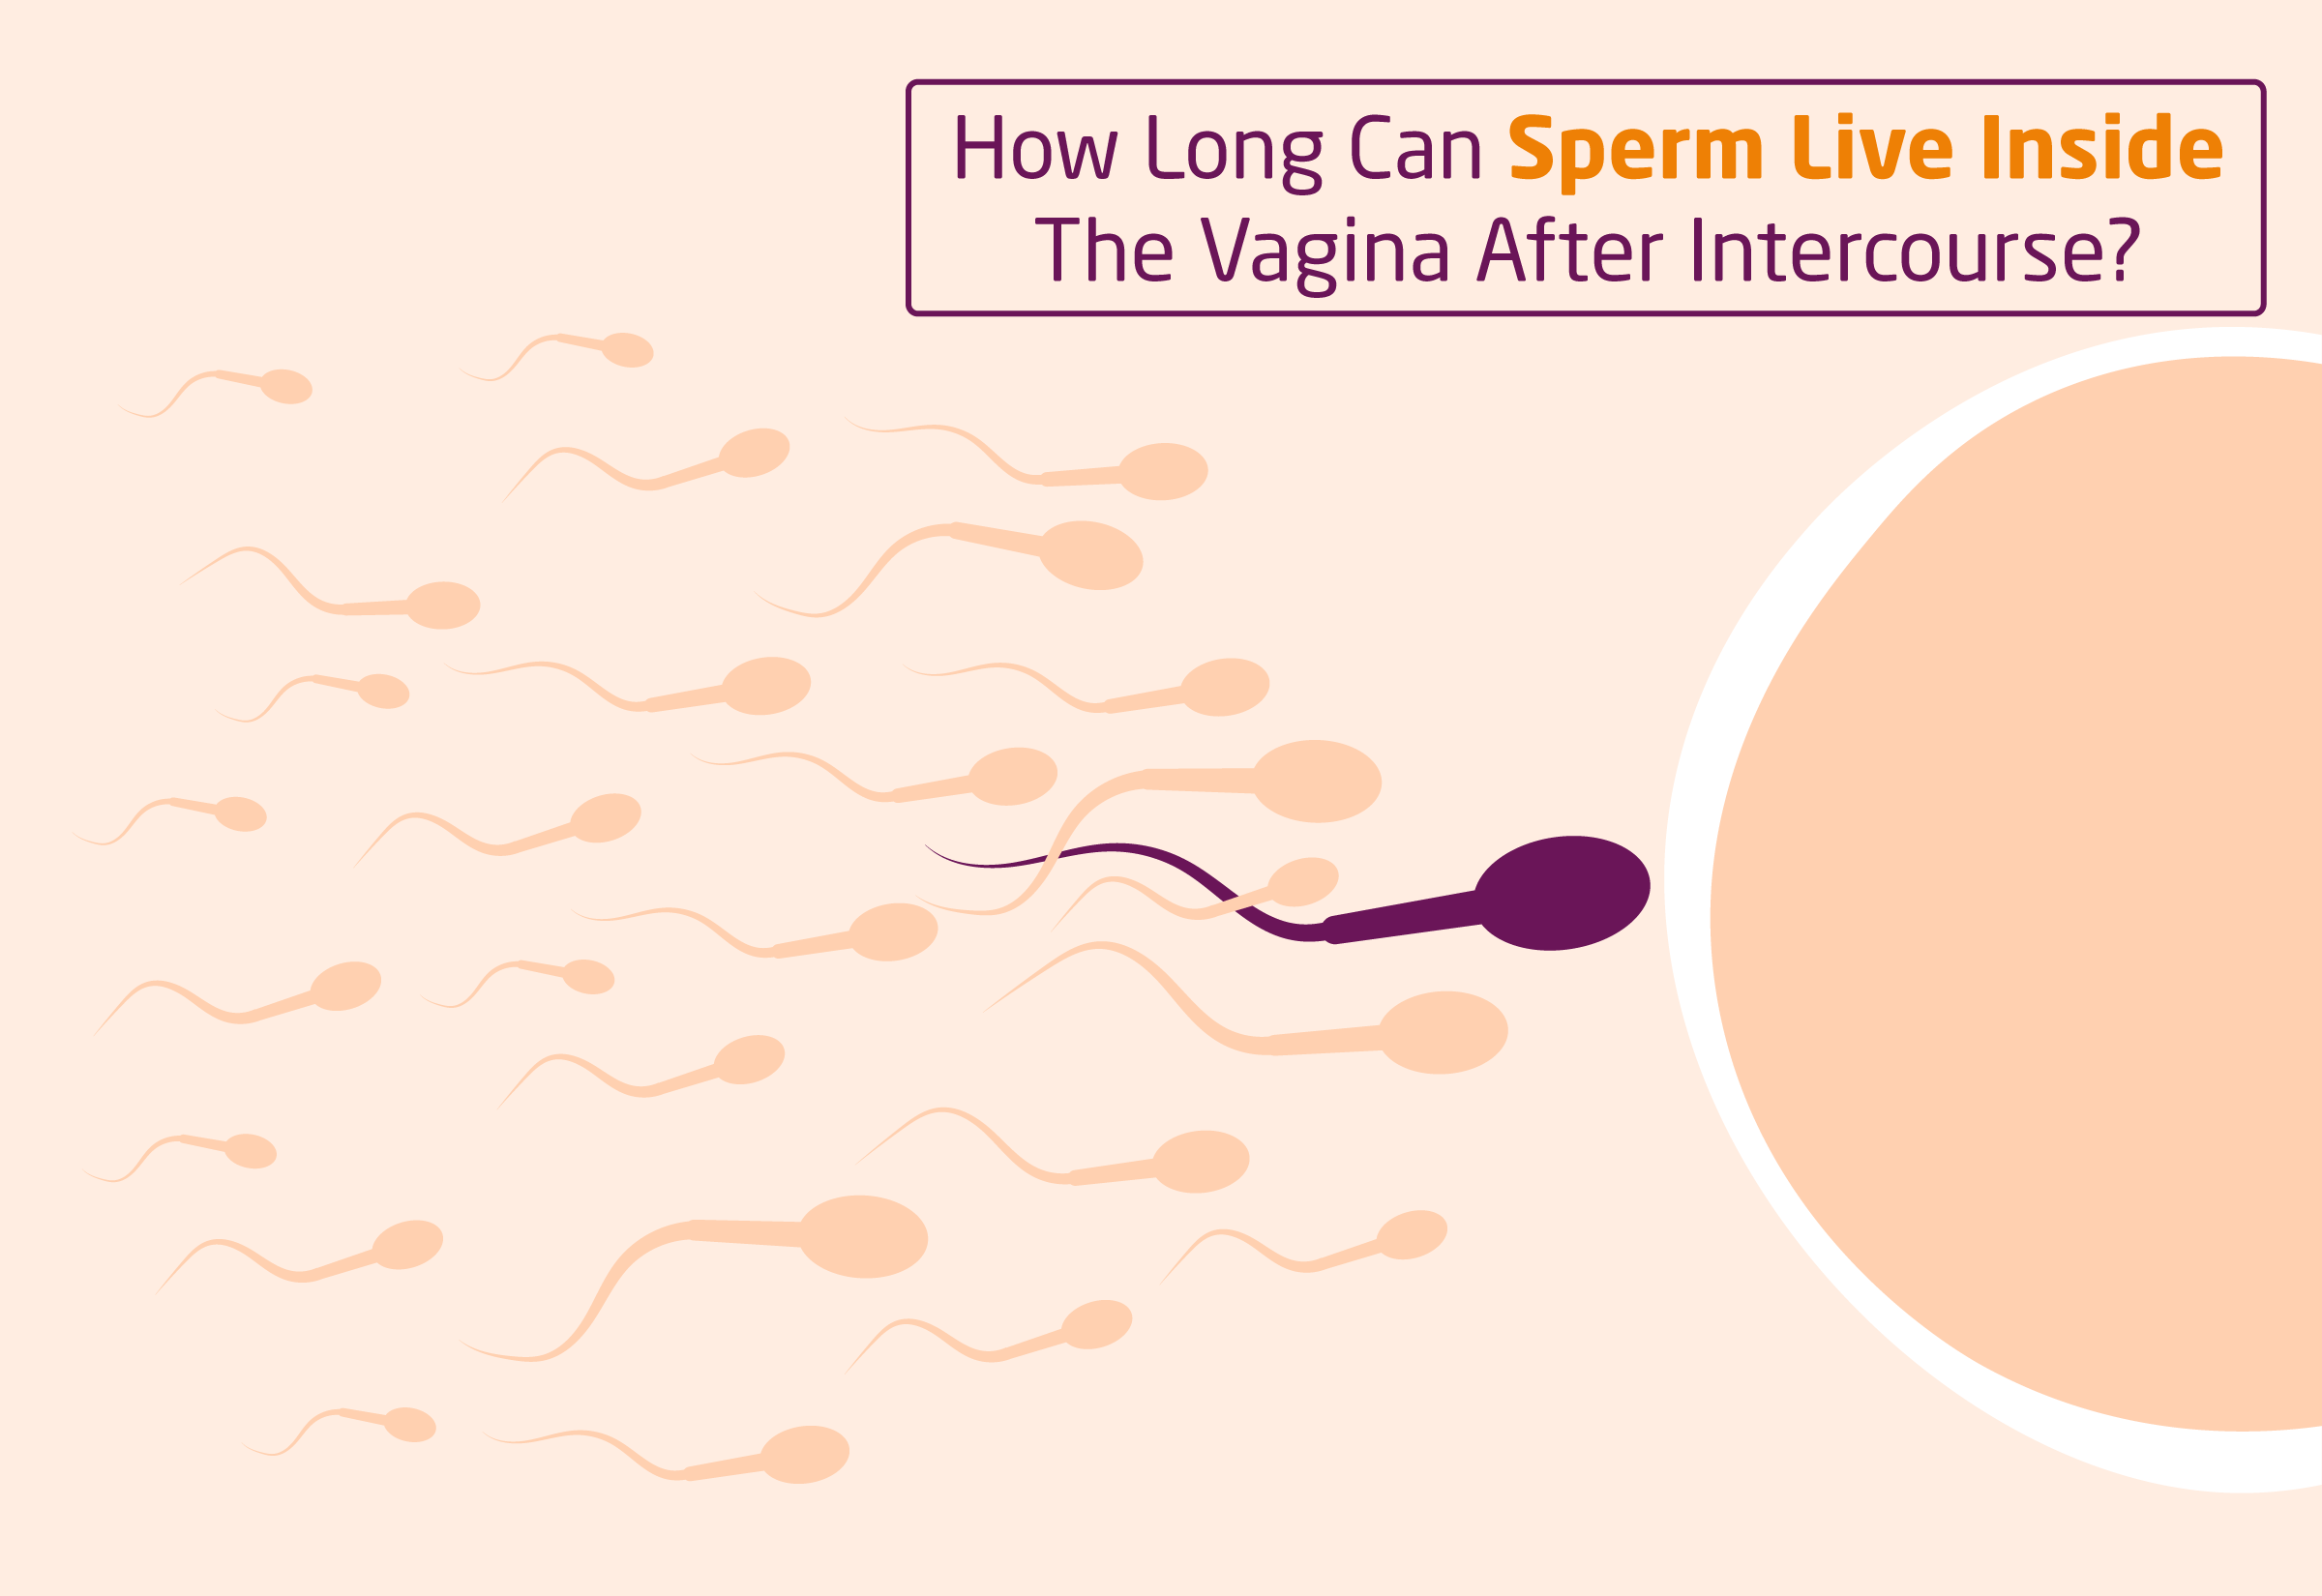 How Long Can Sperm Live Inside The Vagina After Intercourse?